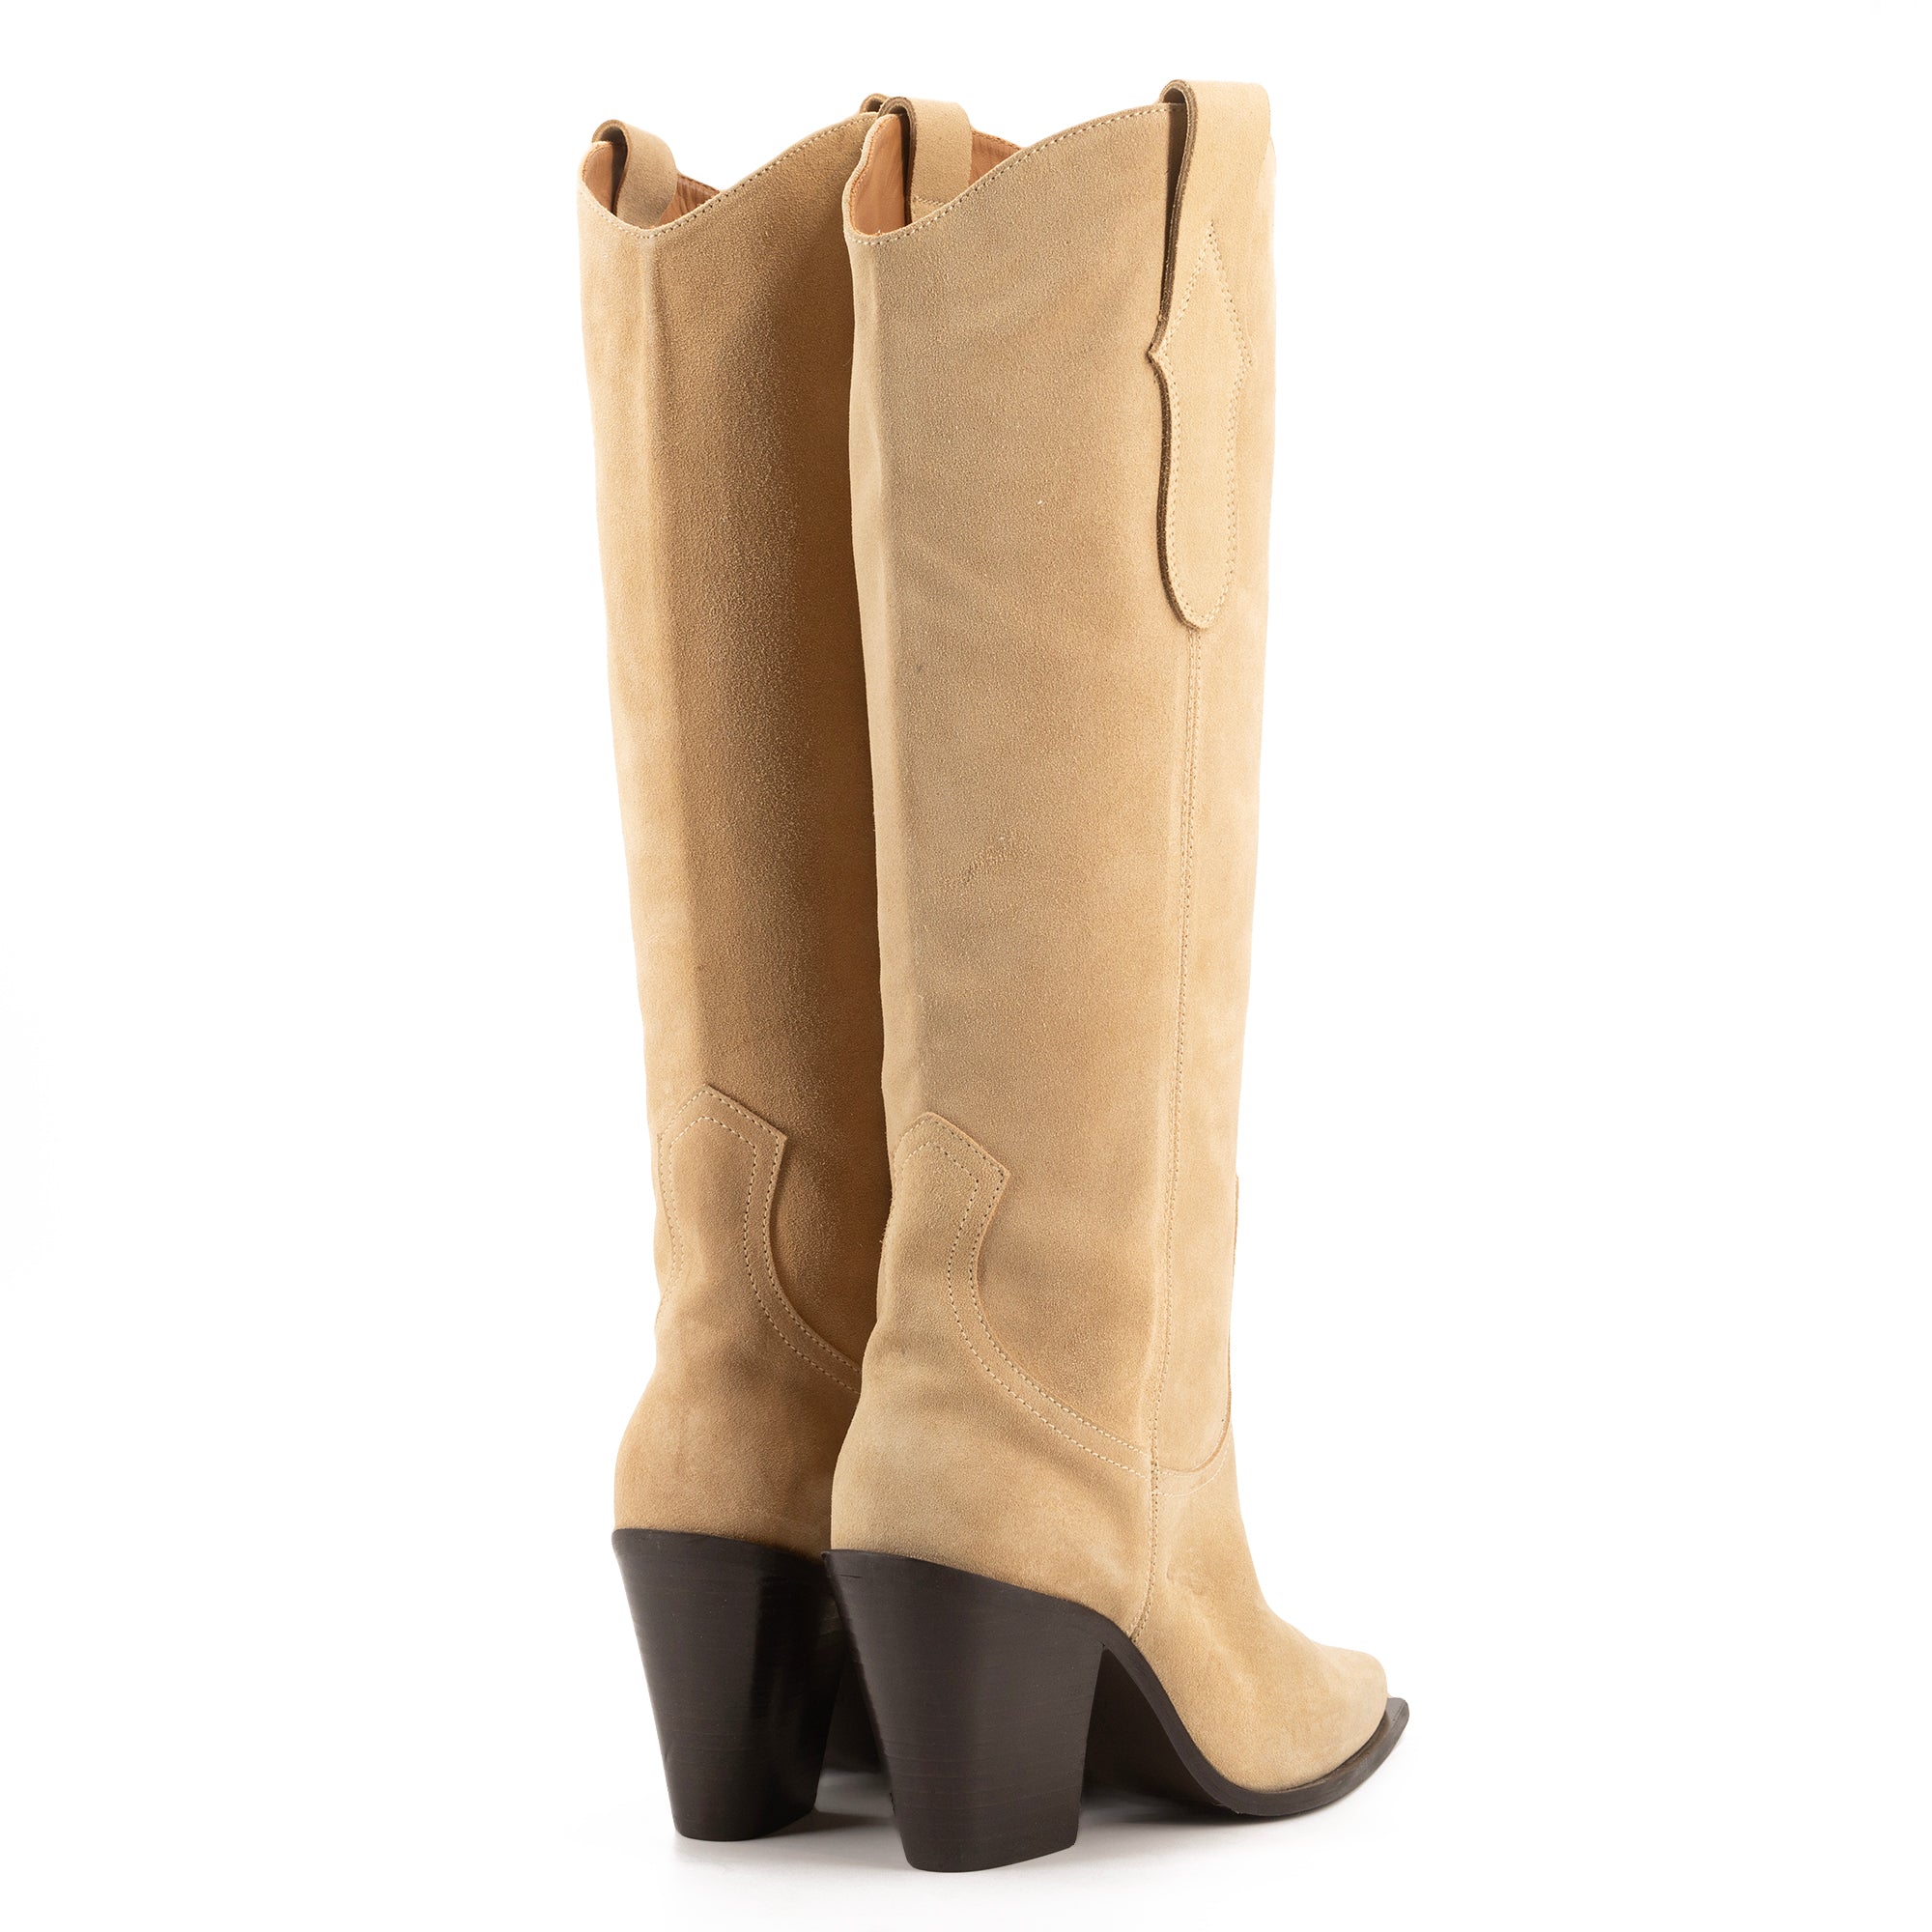 ANA SAND SUEDE BOOTS